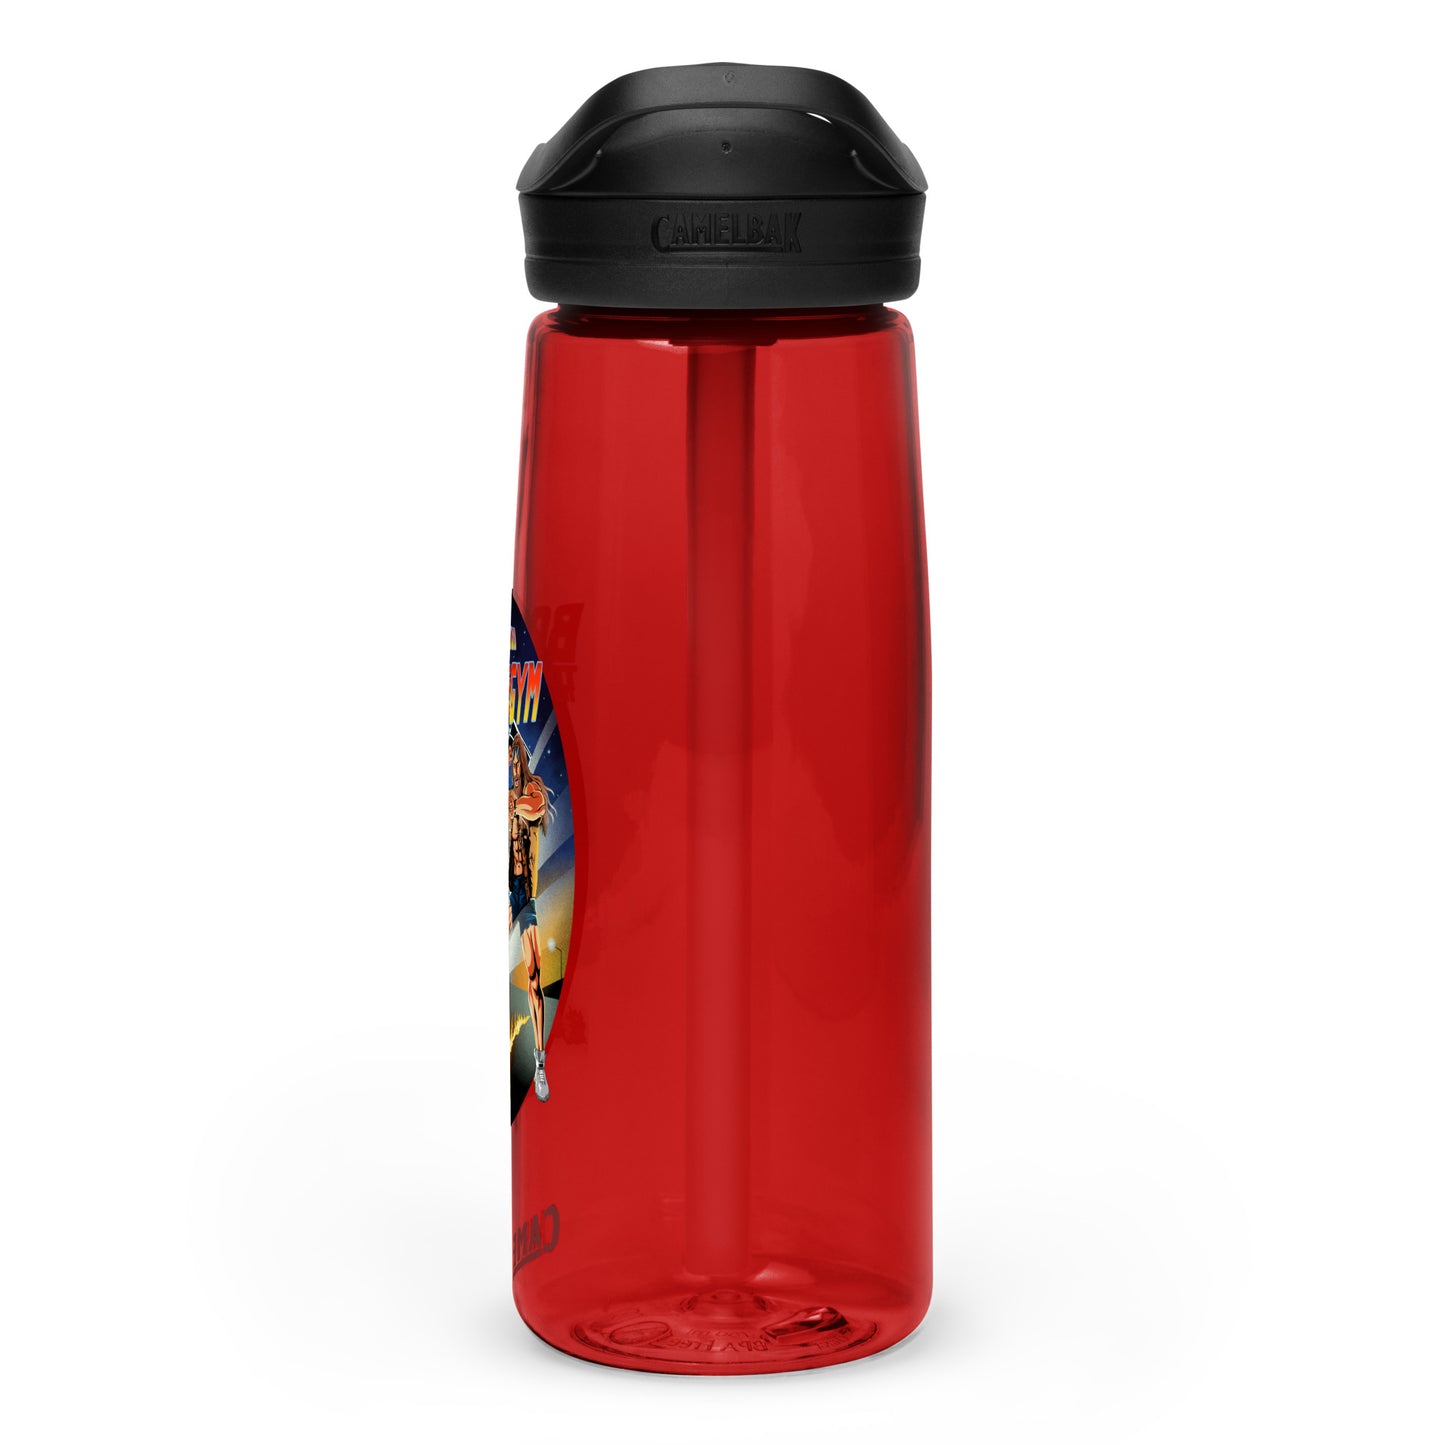 Back To The F*cking (Image) Gym Water Bottle